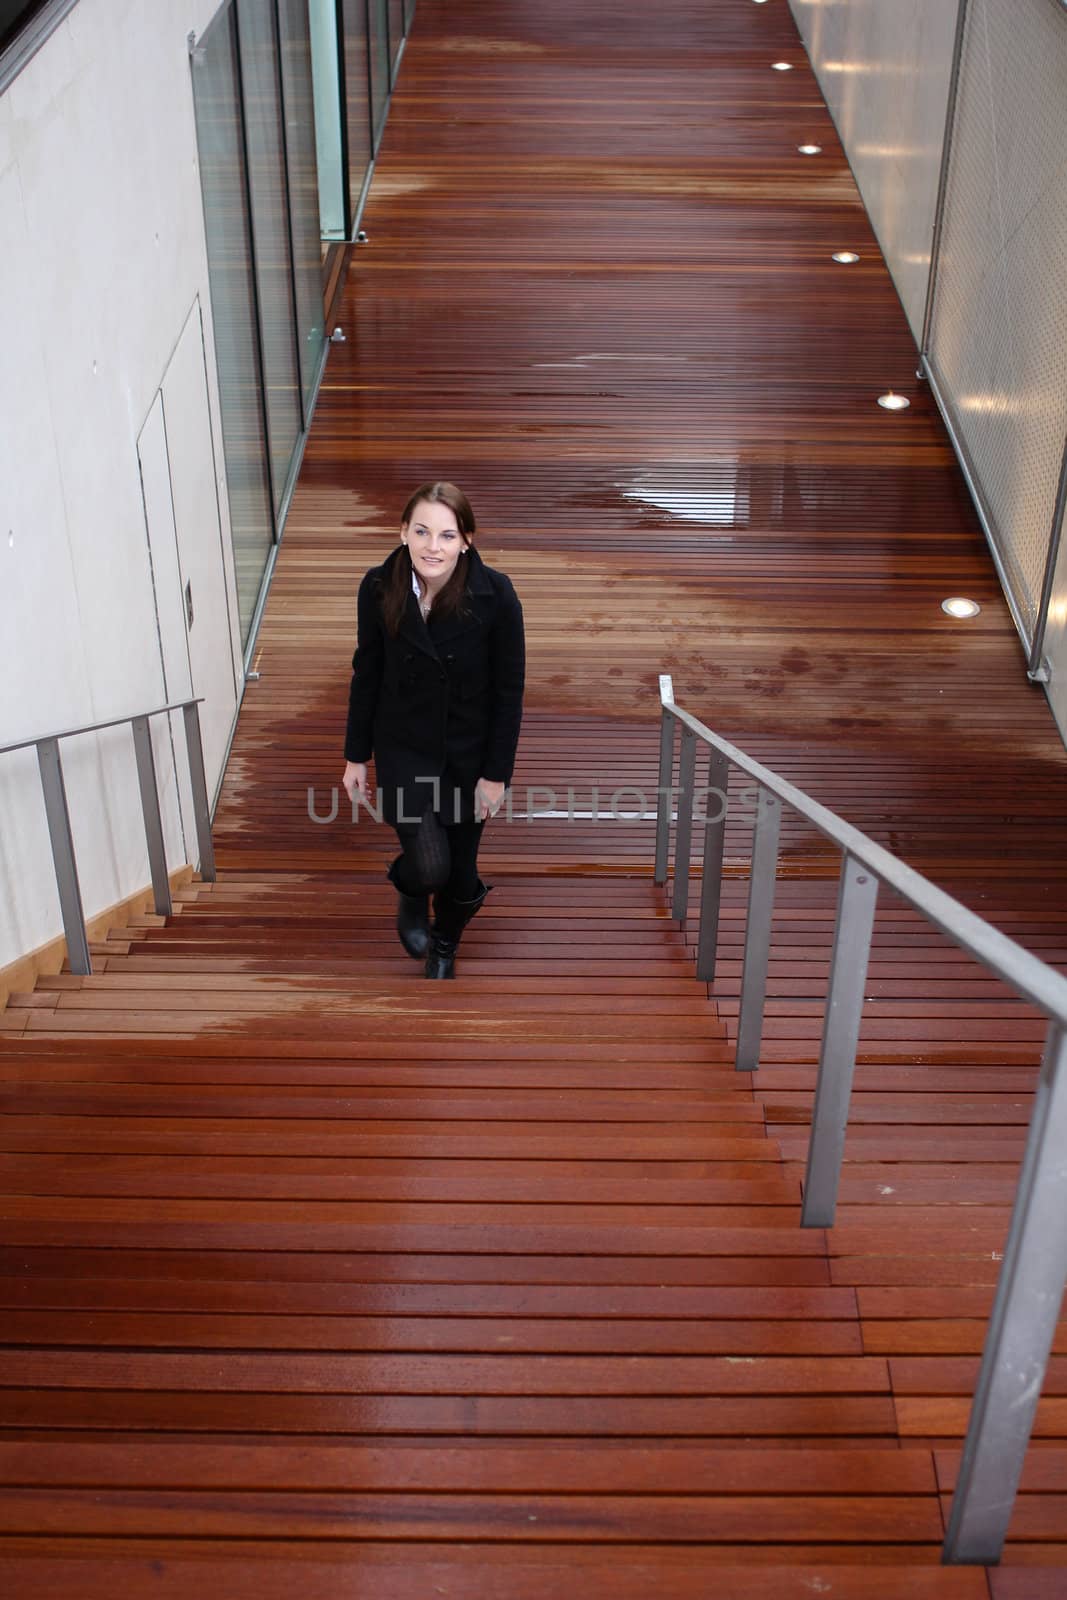 Young Attractive Brunette Woman With Black Clothing Walking Up Stairs